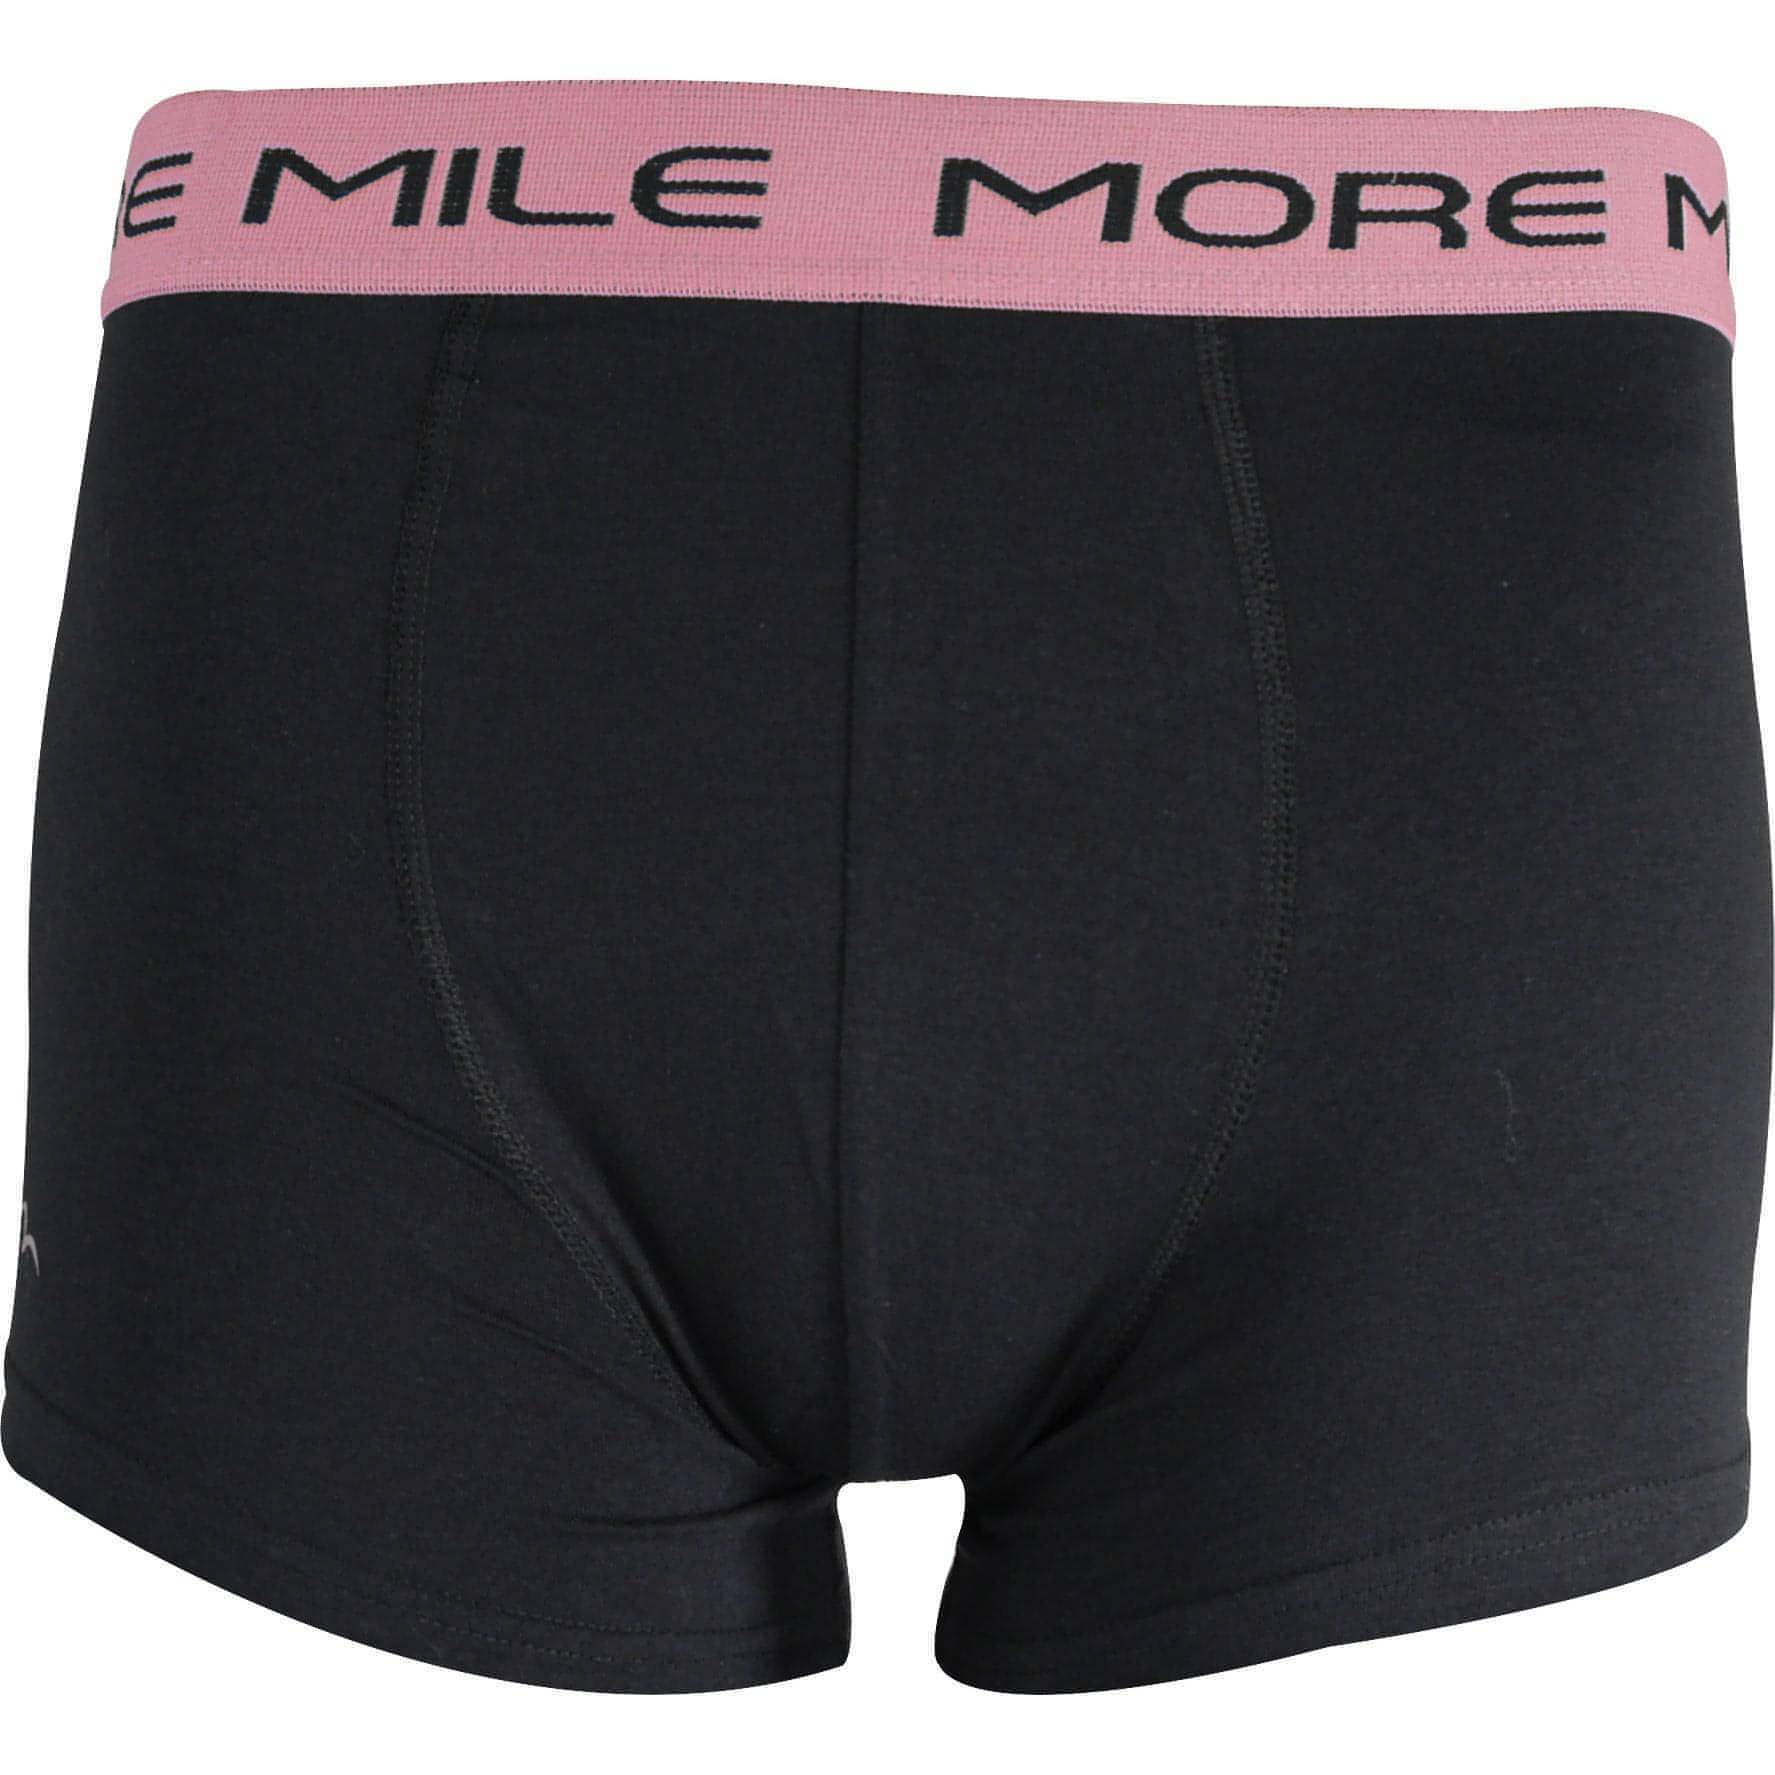 More Mile Pack Boxer 1P204891Wm Pinkjade Pink Front - Front View